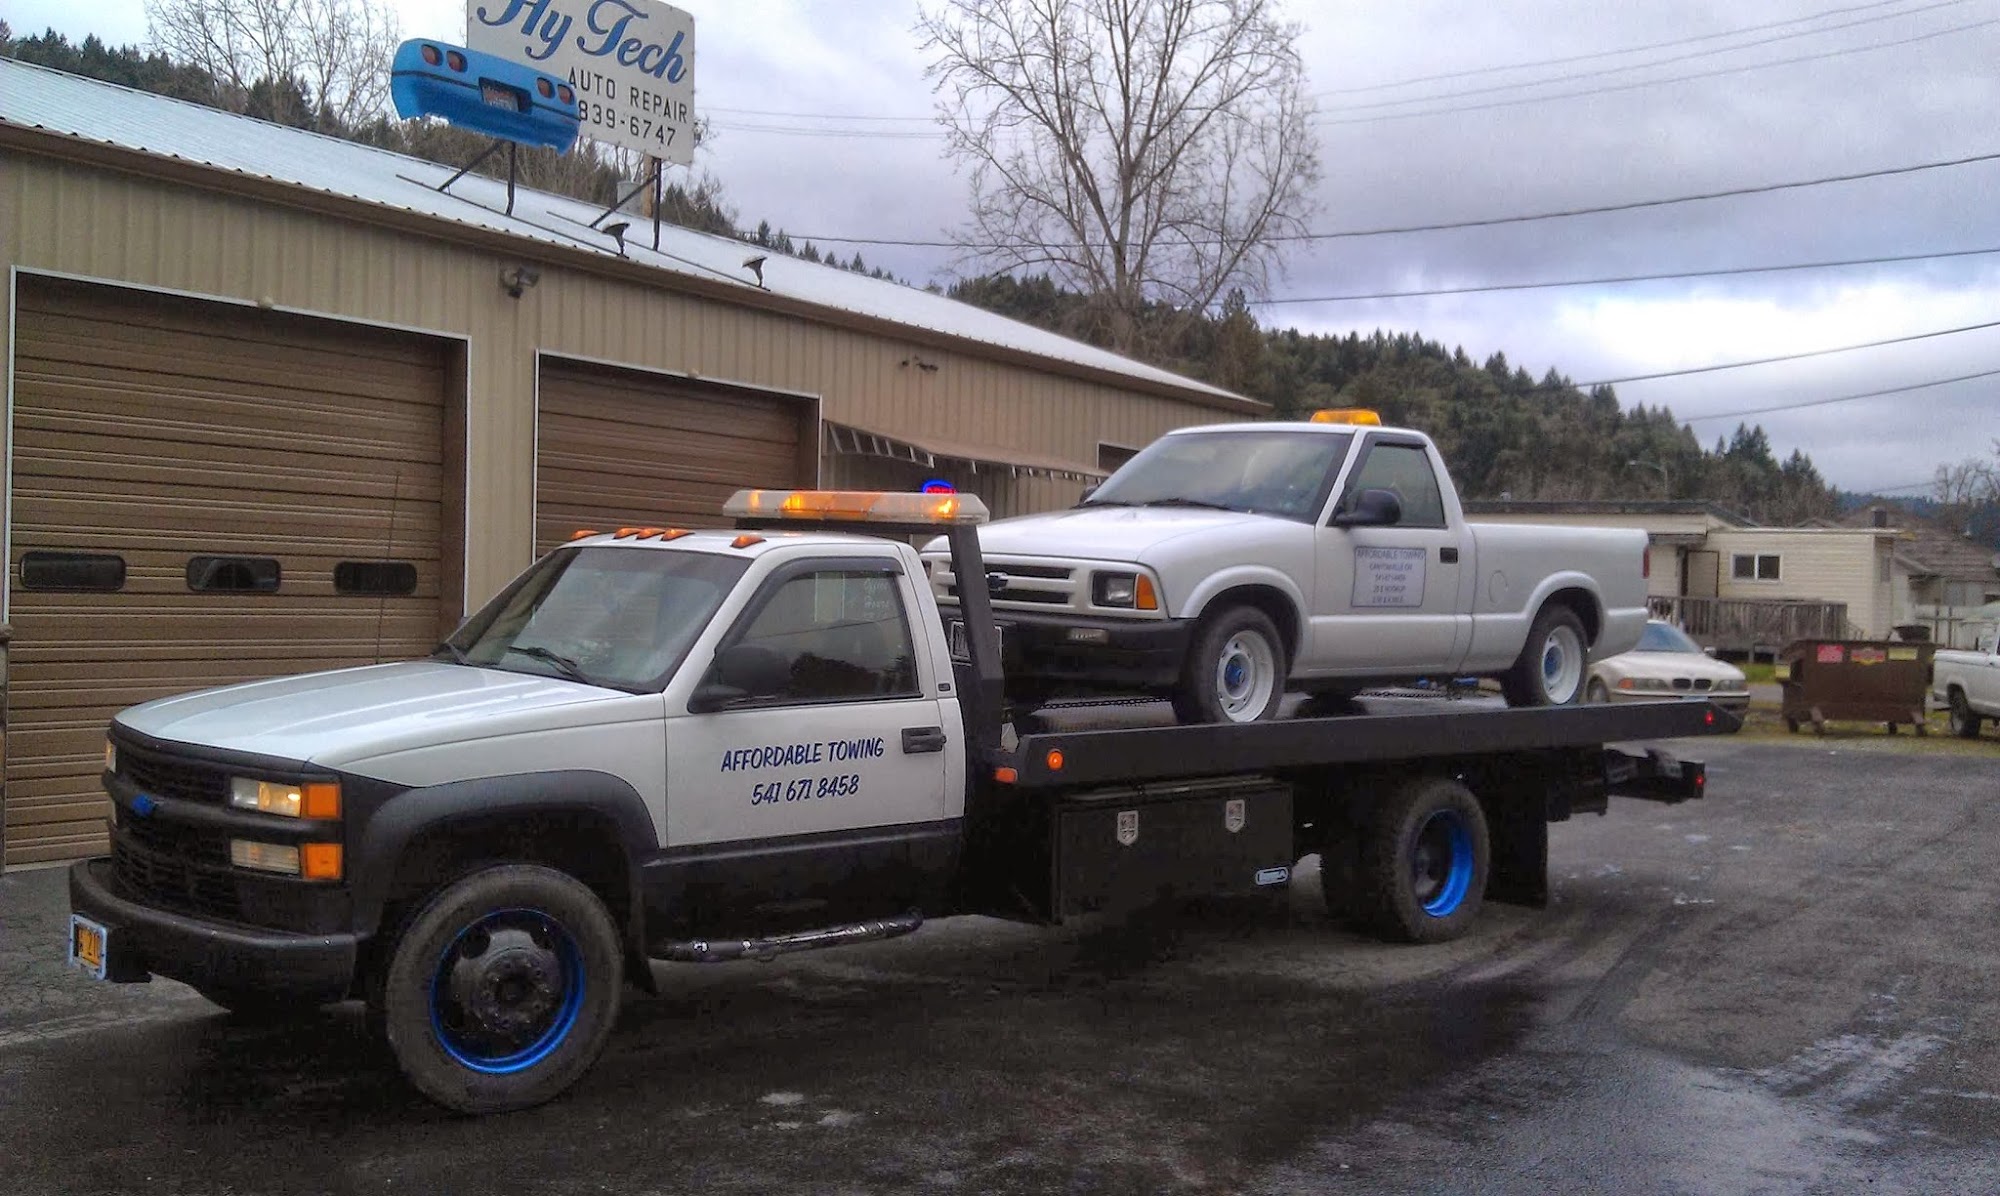 AFFORDABLE TOWING OF CANYONVILLE